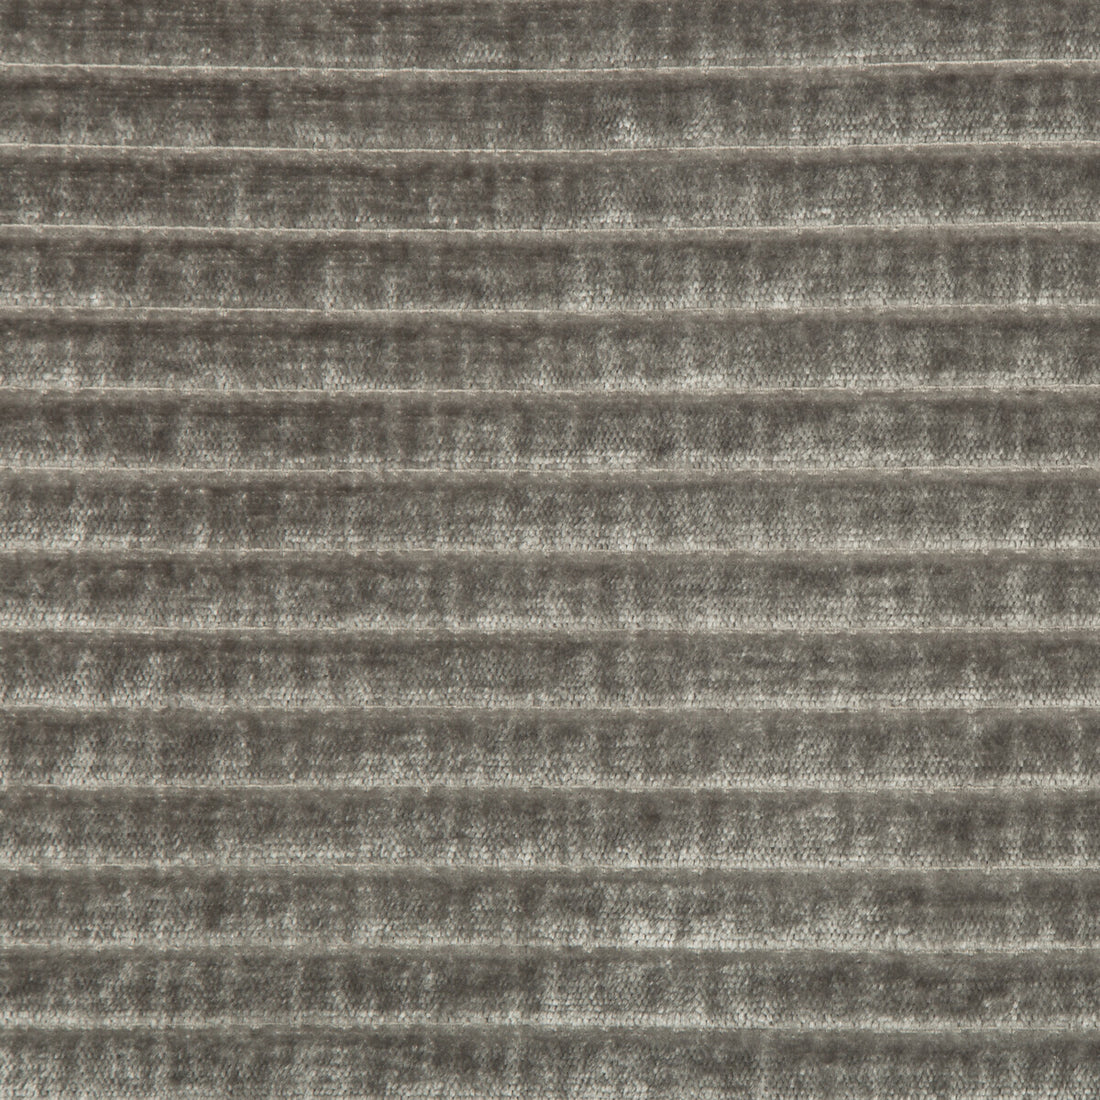 Kravet Smart fabric in 35780-11 color - pattern 35780.11.0 - by Kravet Smart in the Performance collection